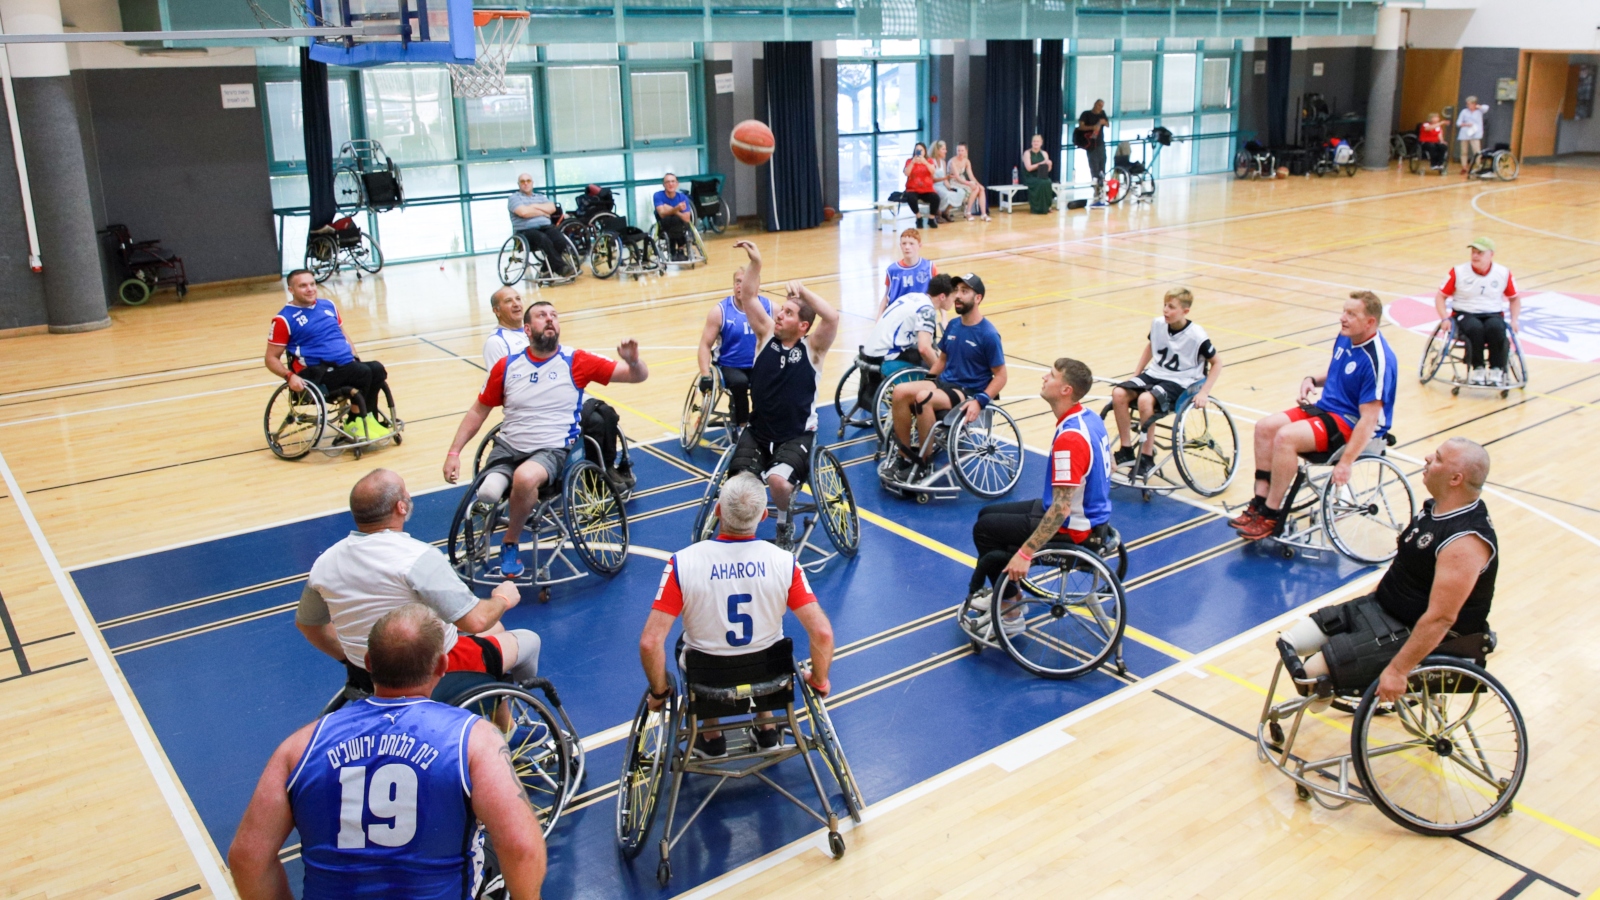 Israeli and British wounded veterans playing wheelchair basketball at the inaugural Veteran Games in Israel, May 2019. Photo: courtesy